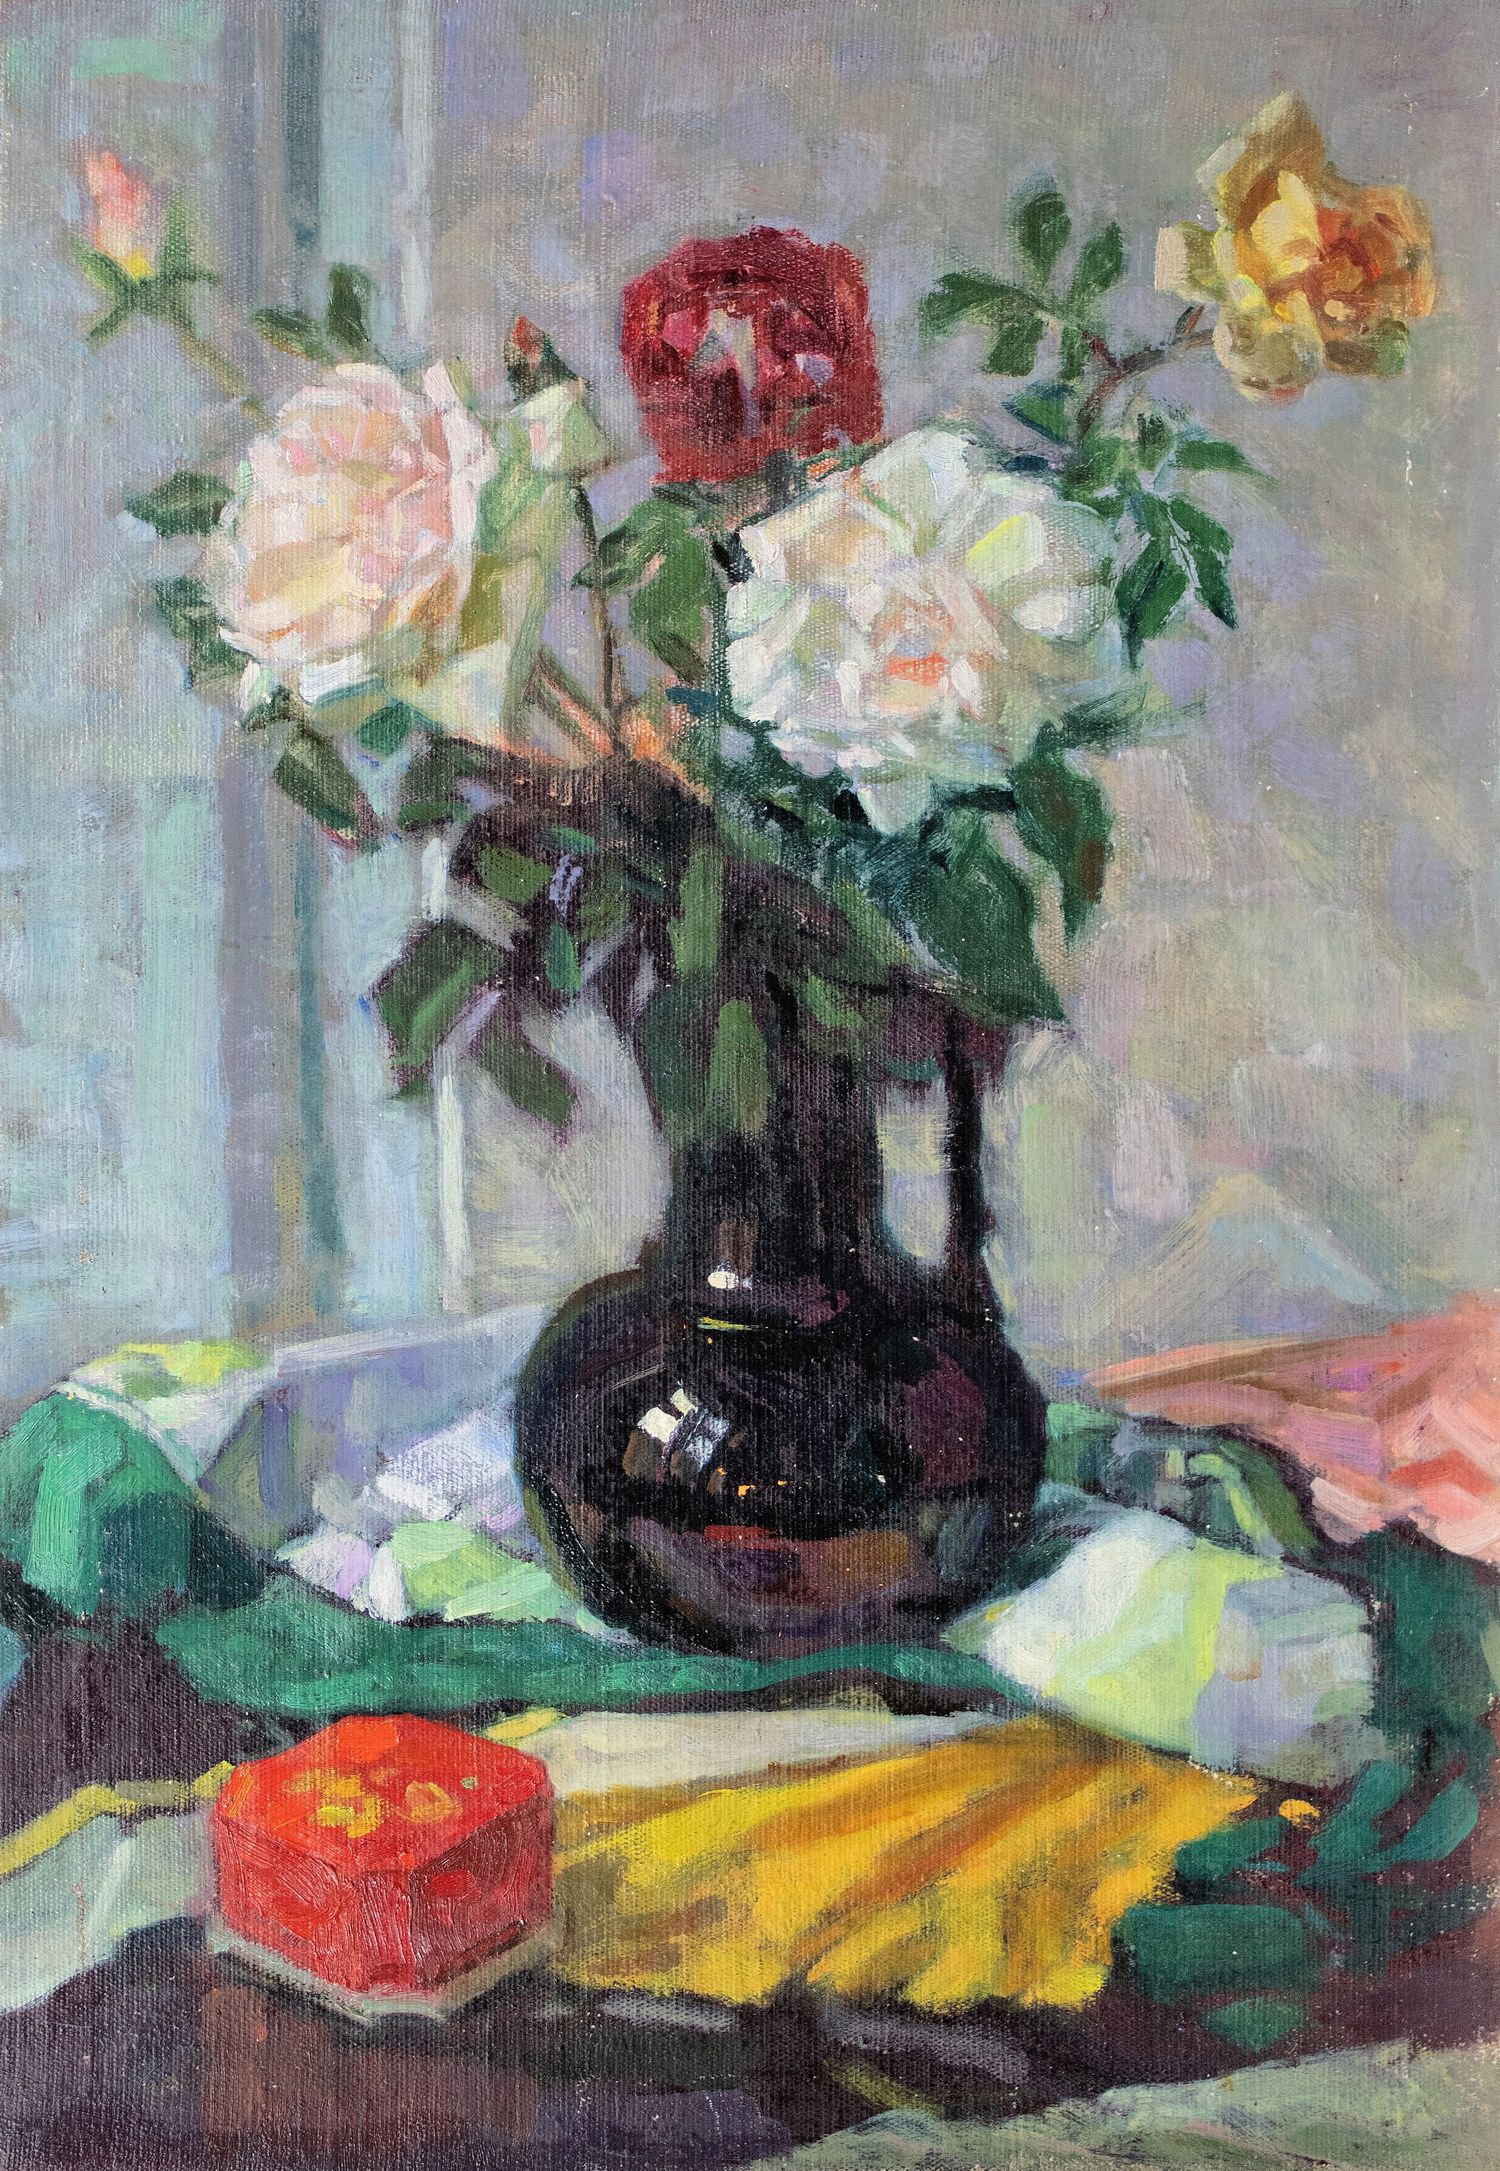 "Still life with roses"